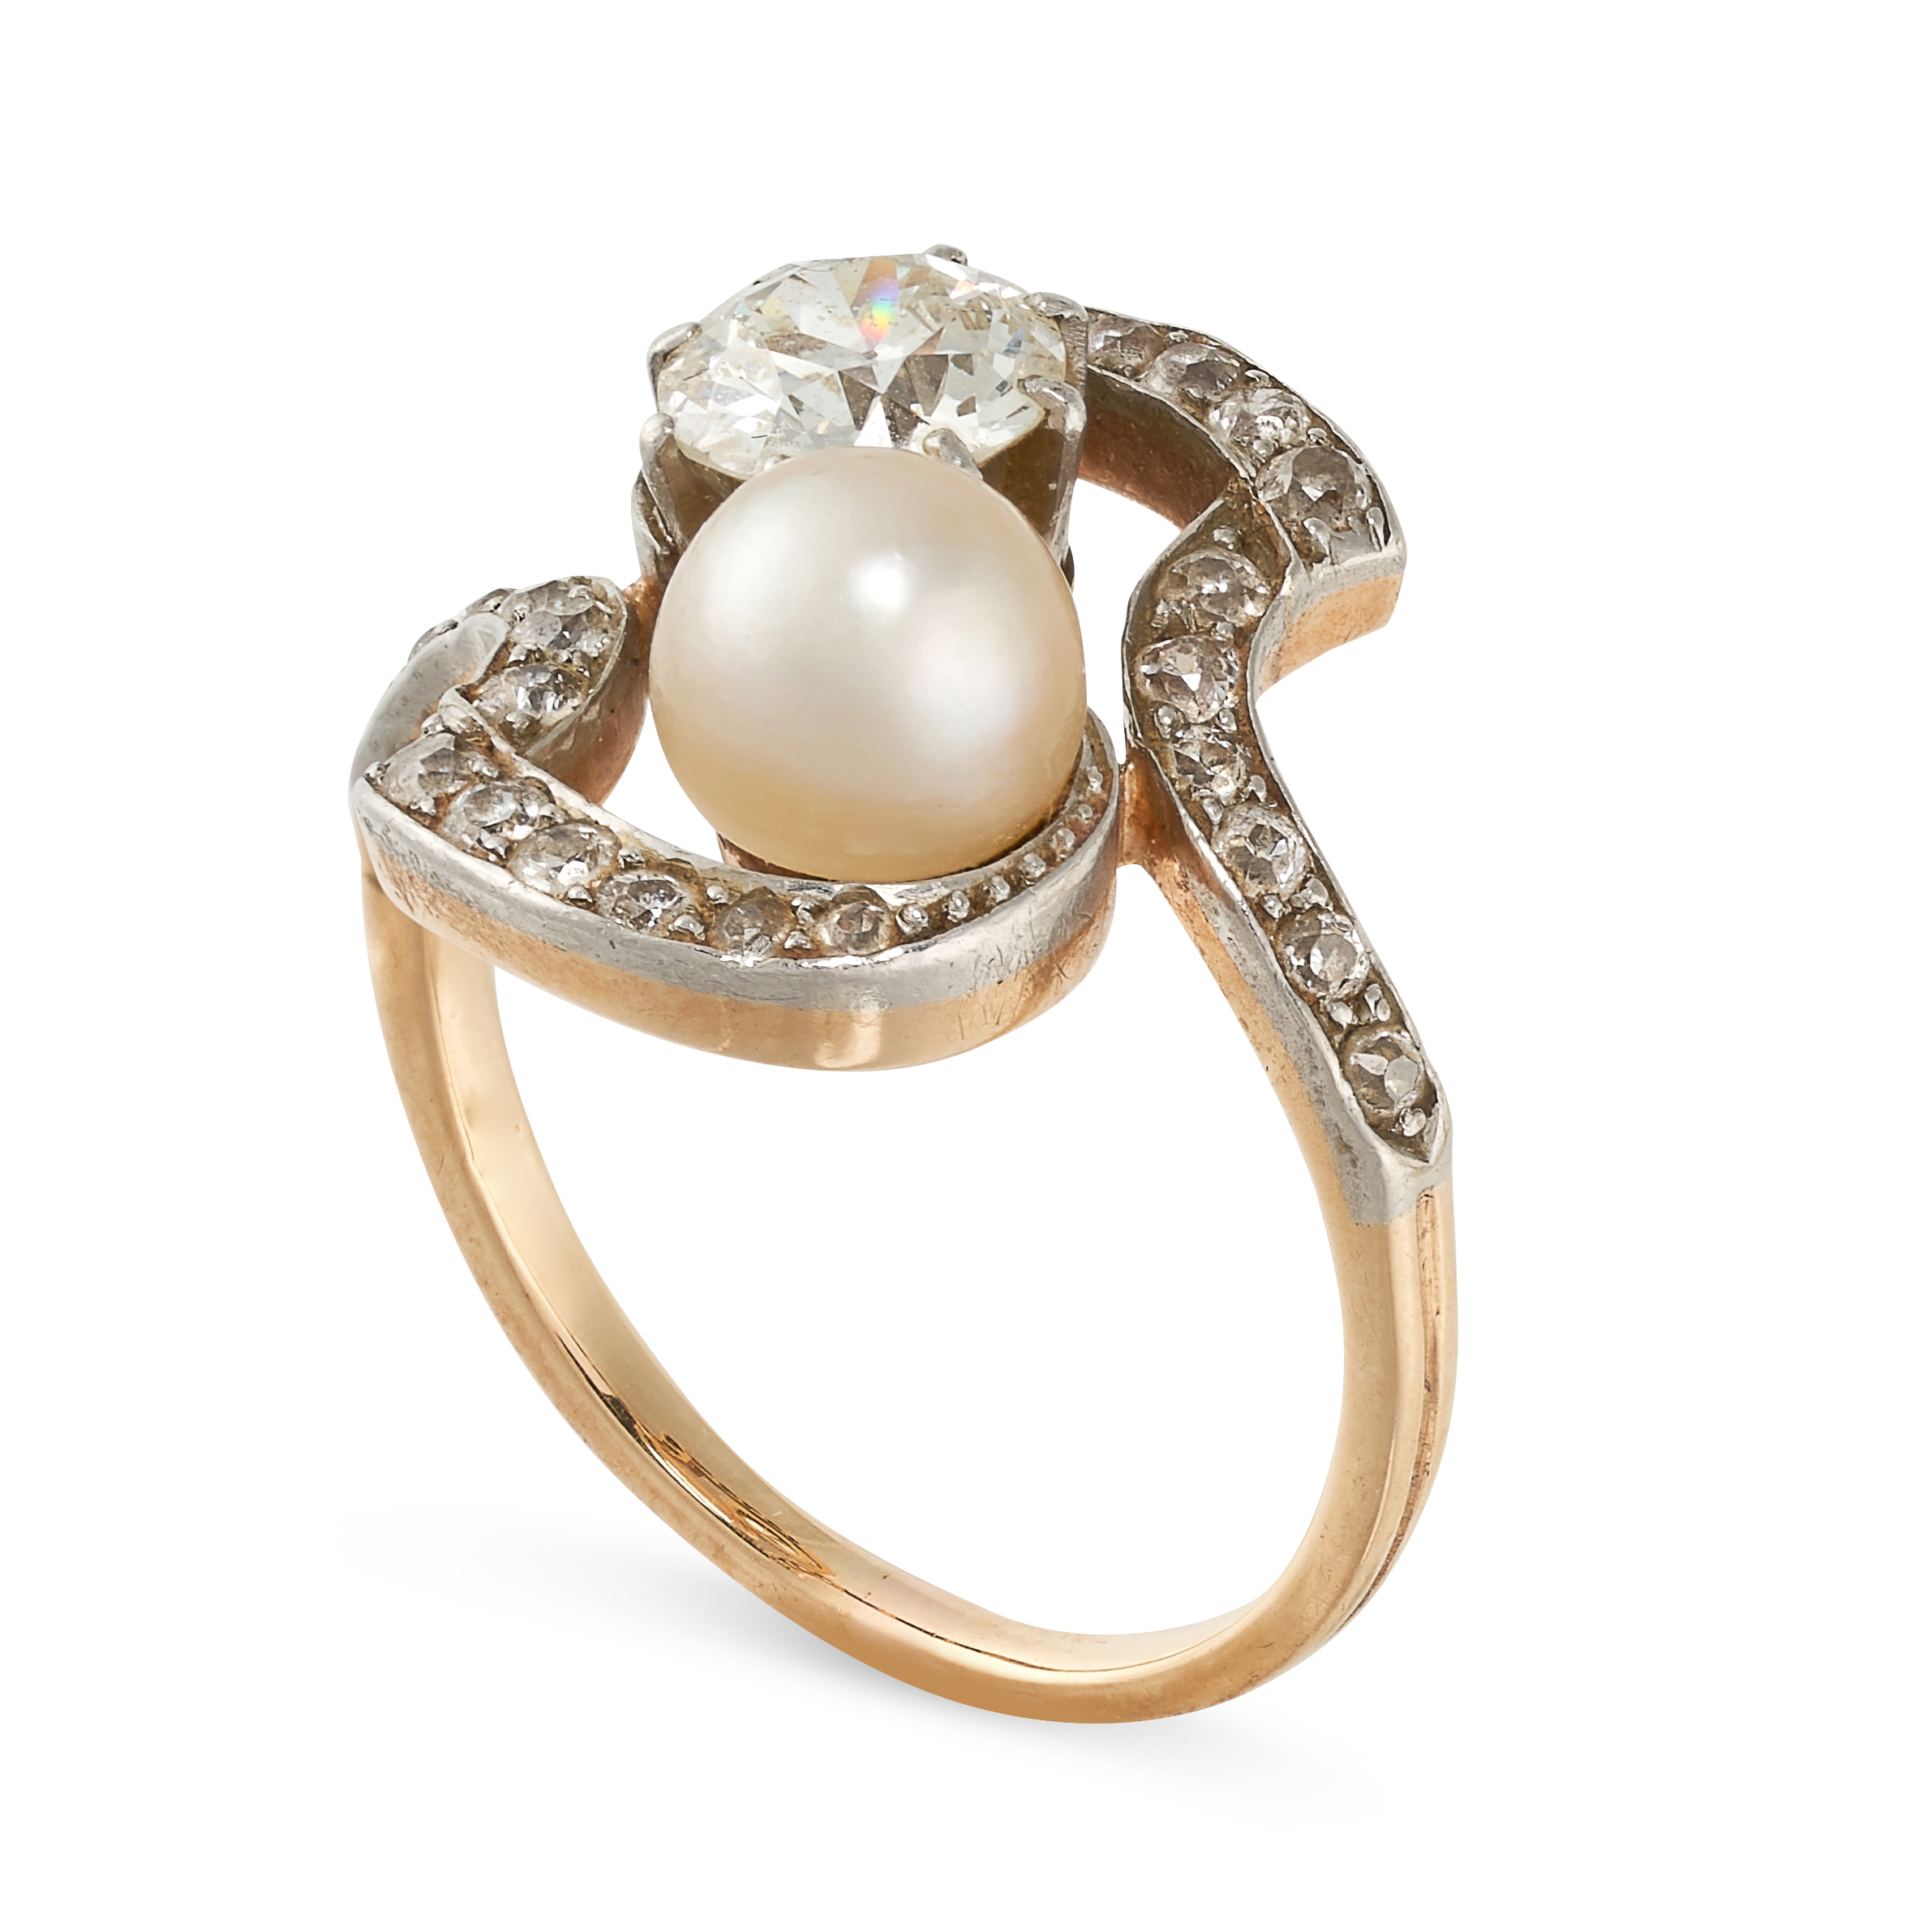 NO RESERVE - A DIAMOND AND PEARL DRESS RING, EARLY 20TH CENTURY  Made in yellow gold and platinum - Image 2 of 2